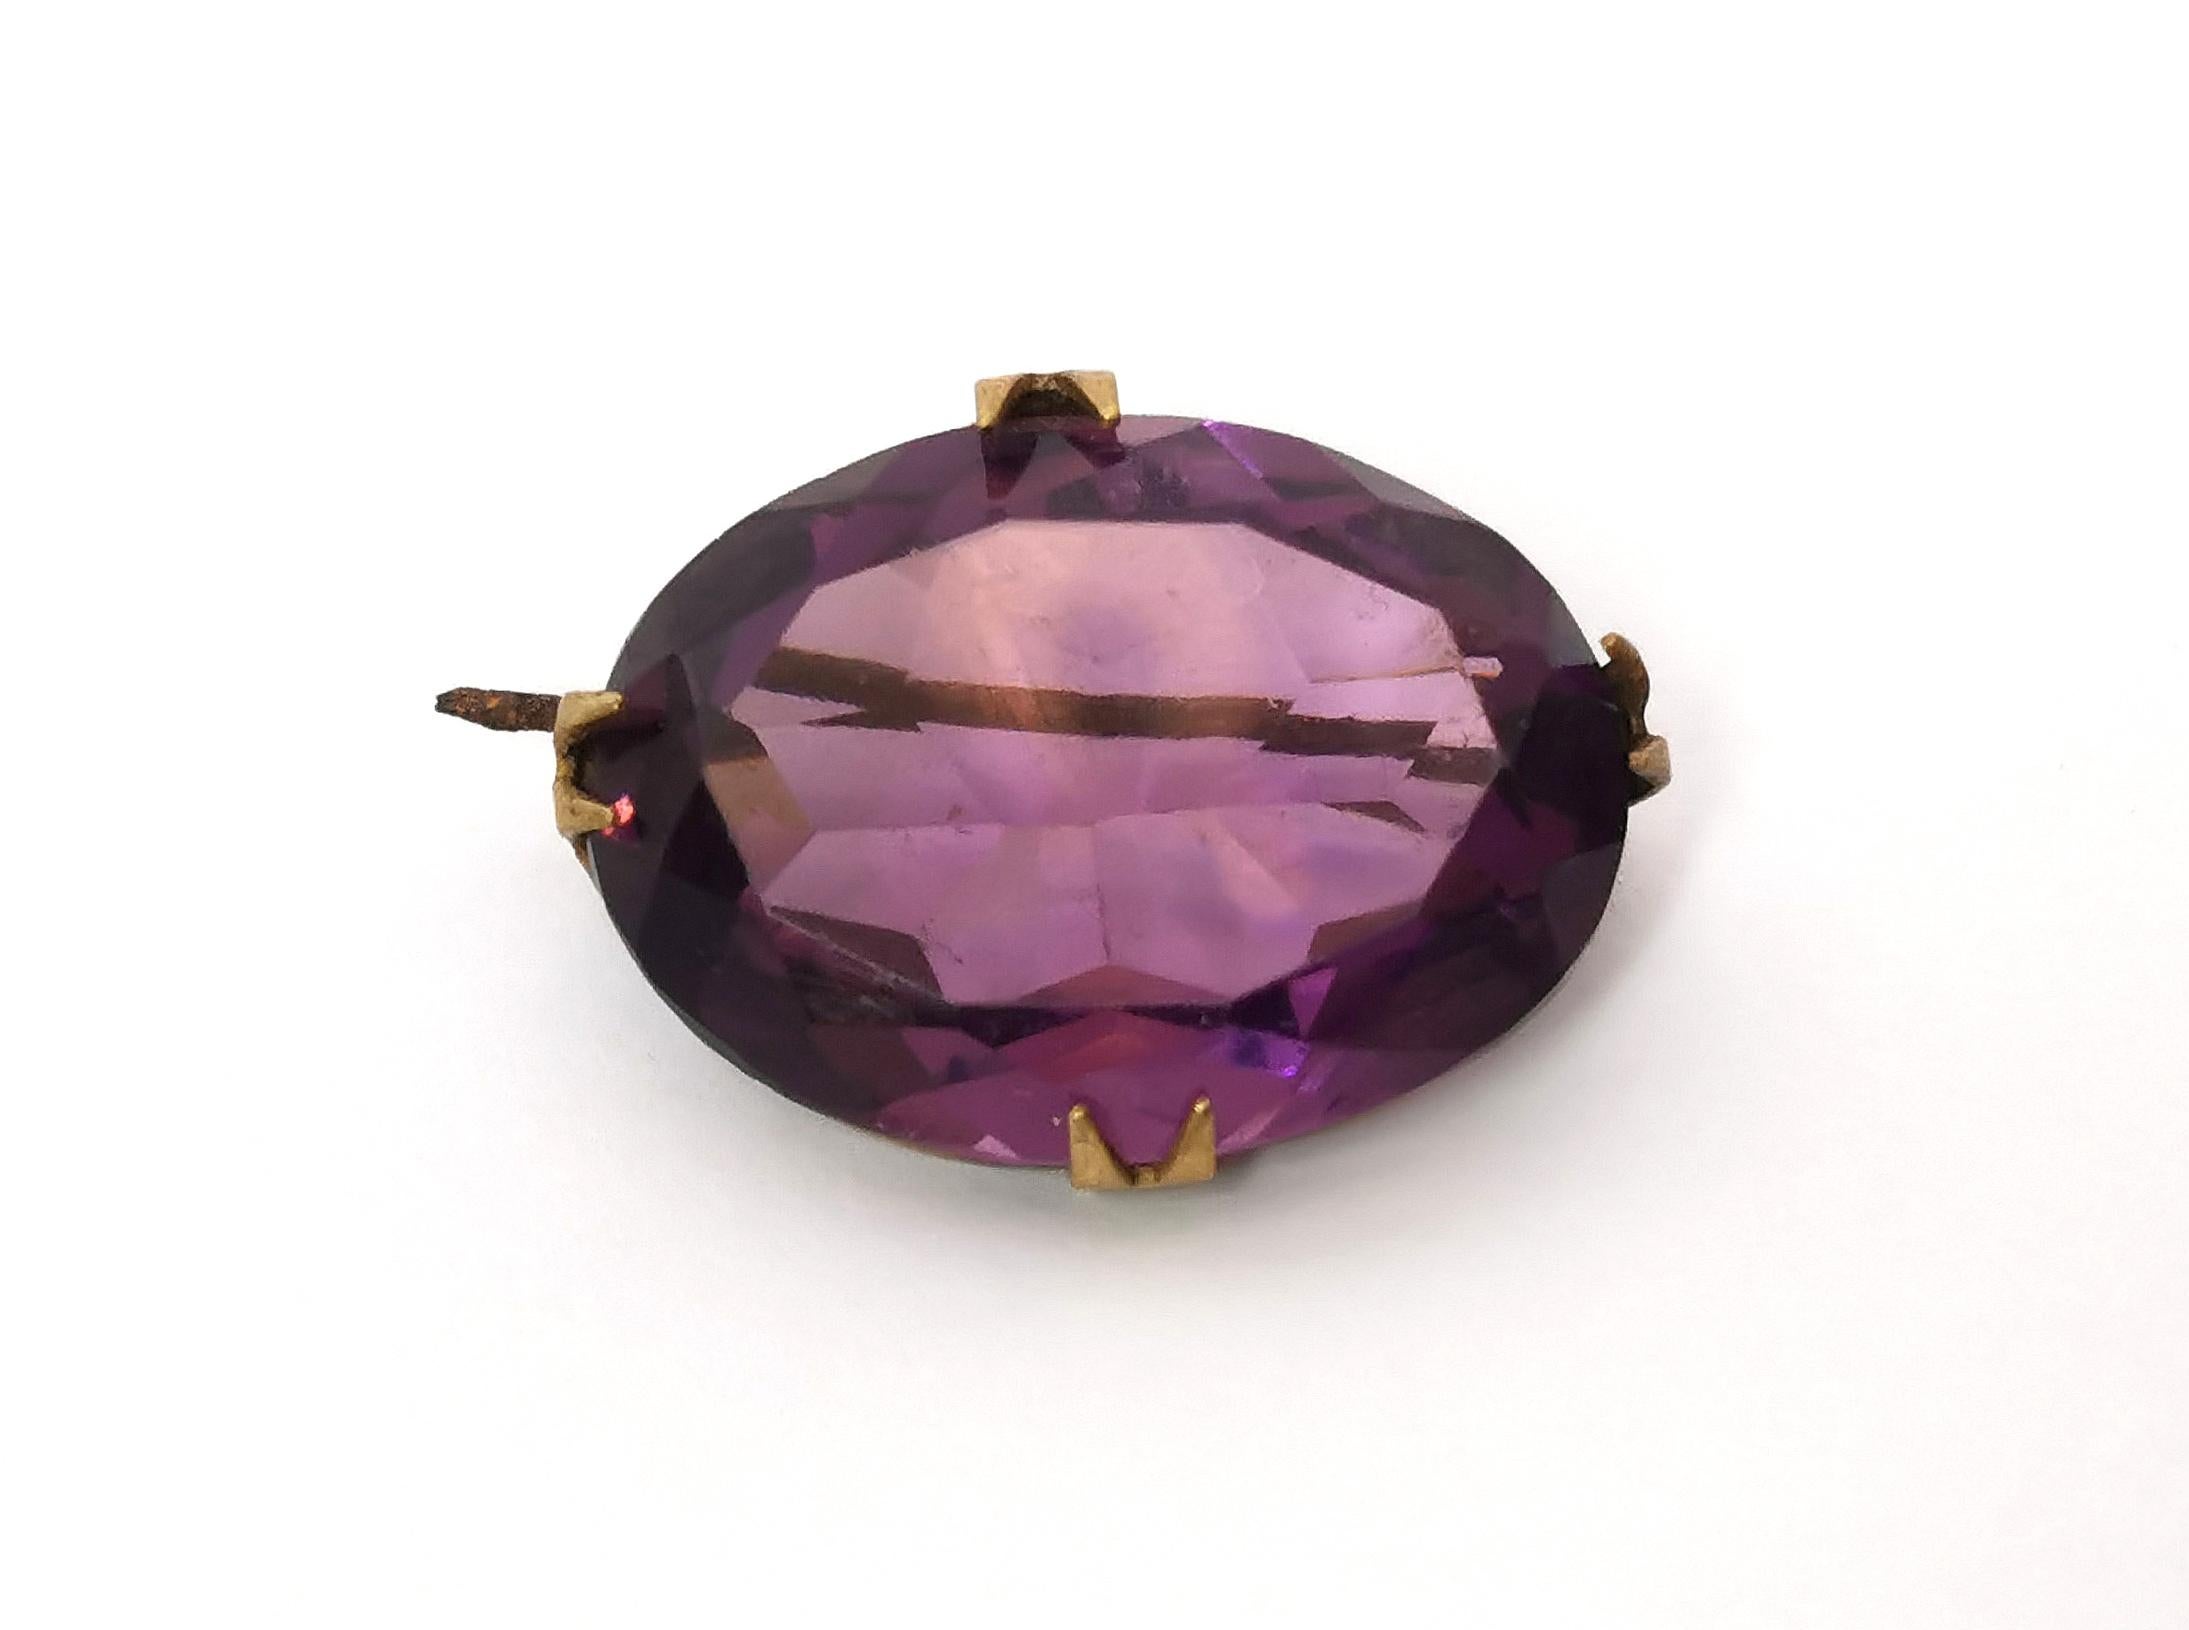 An attractive antique Edwardian era Amethyst paste brooch.

It is an oval shaped brooch with a pretty faceted cut purple paste with rich tones.

Set into a gilt metal setting with an old c type pin and clasp fastener.

Lovely rich hues and flashes